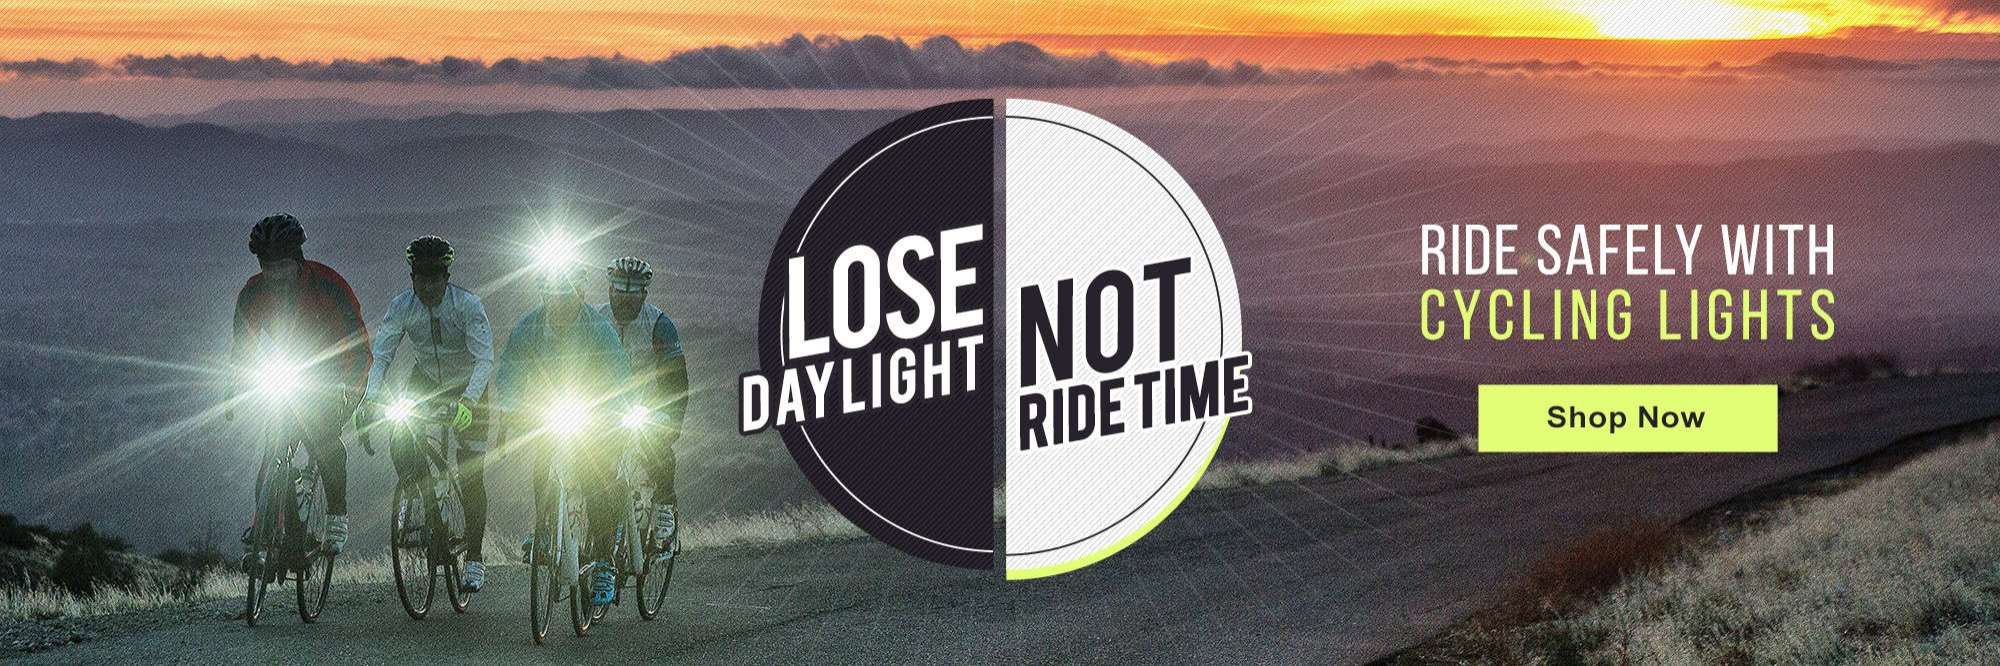 Lose Daylight Not Ride Time